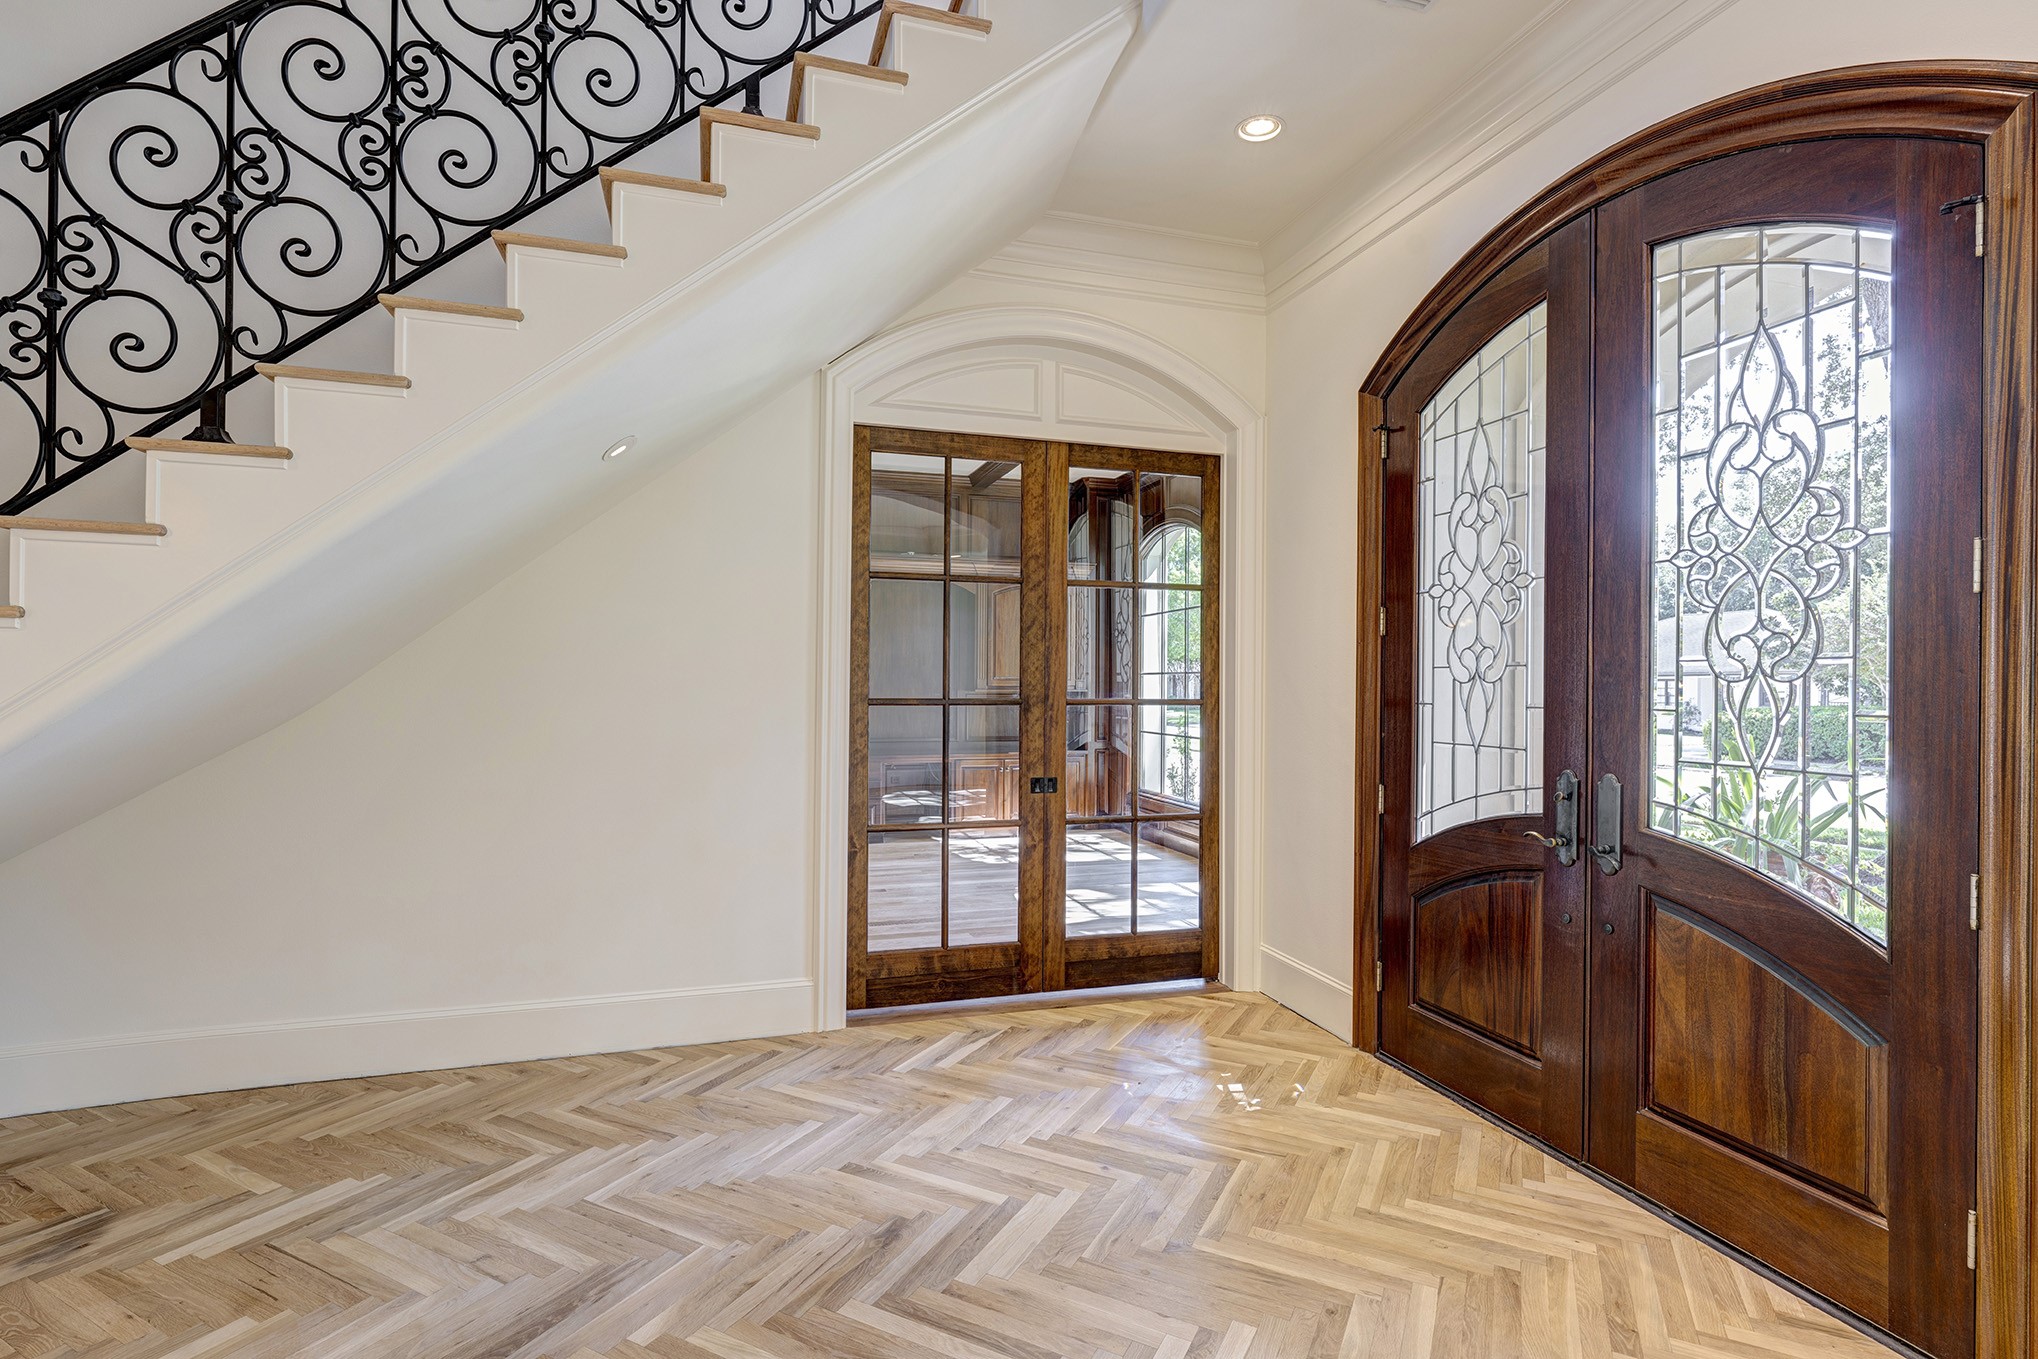 Open and bright entry welcomes your guests. Stunning custom Herringbone pattern floor. The floors have been recently refinished and are awaiting the new buyers choice of stain color.